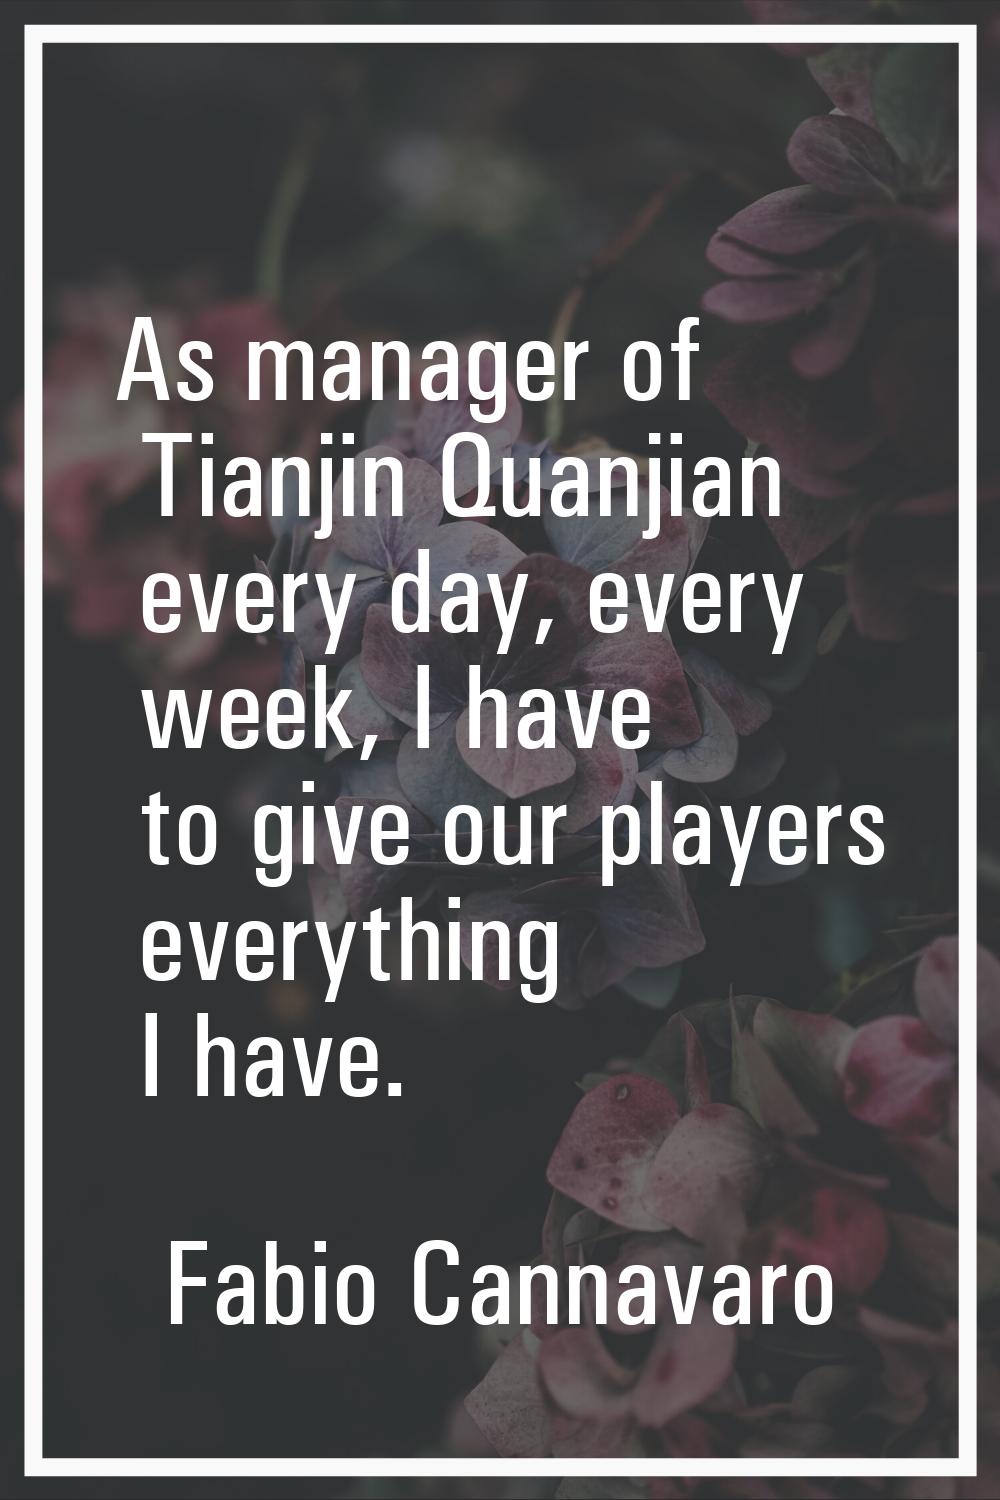 As manager of Tianjin Quanjian every day, every week, I have to give our players everything I have.